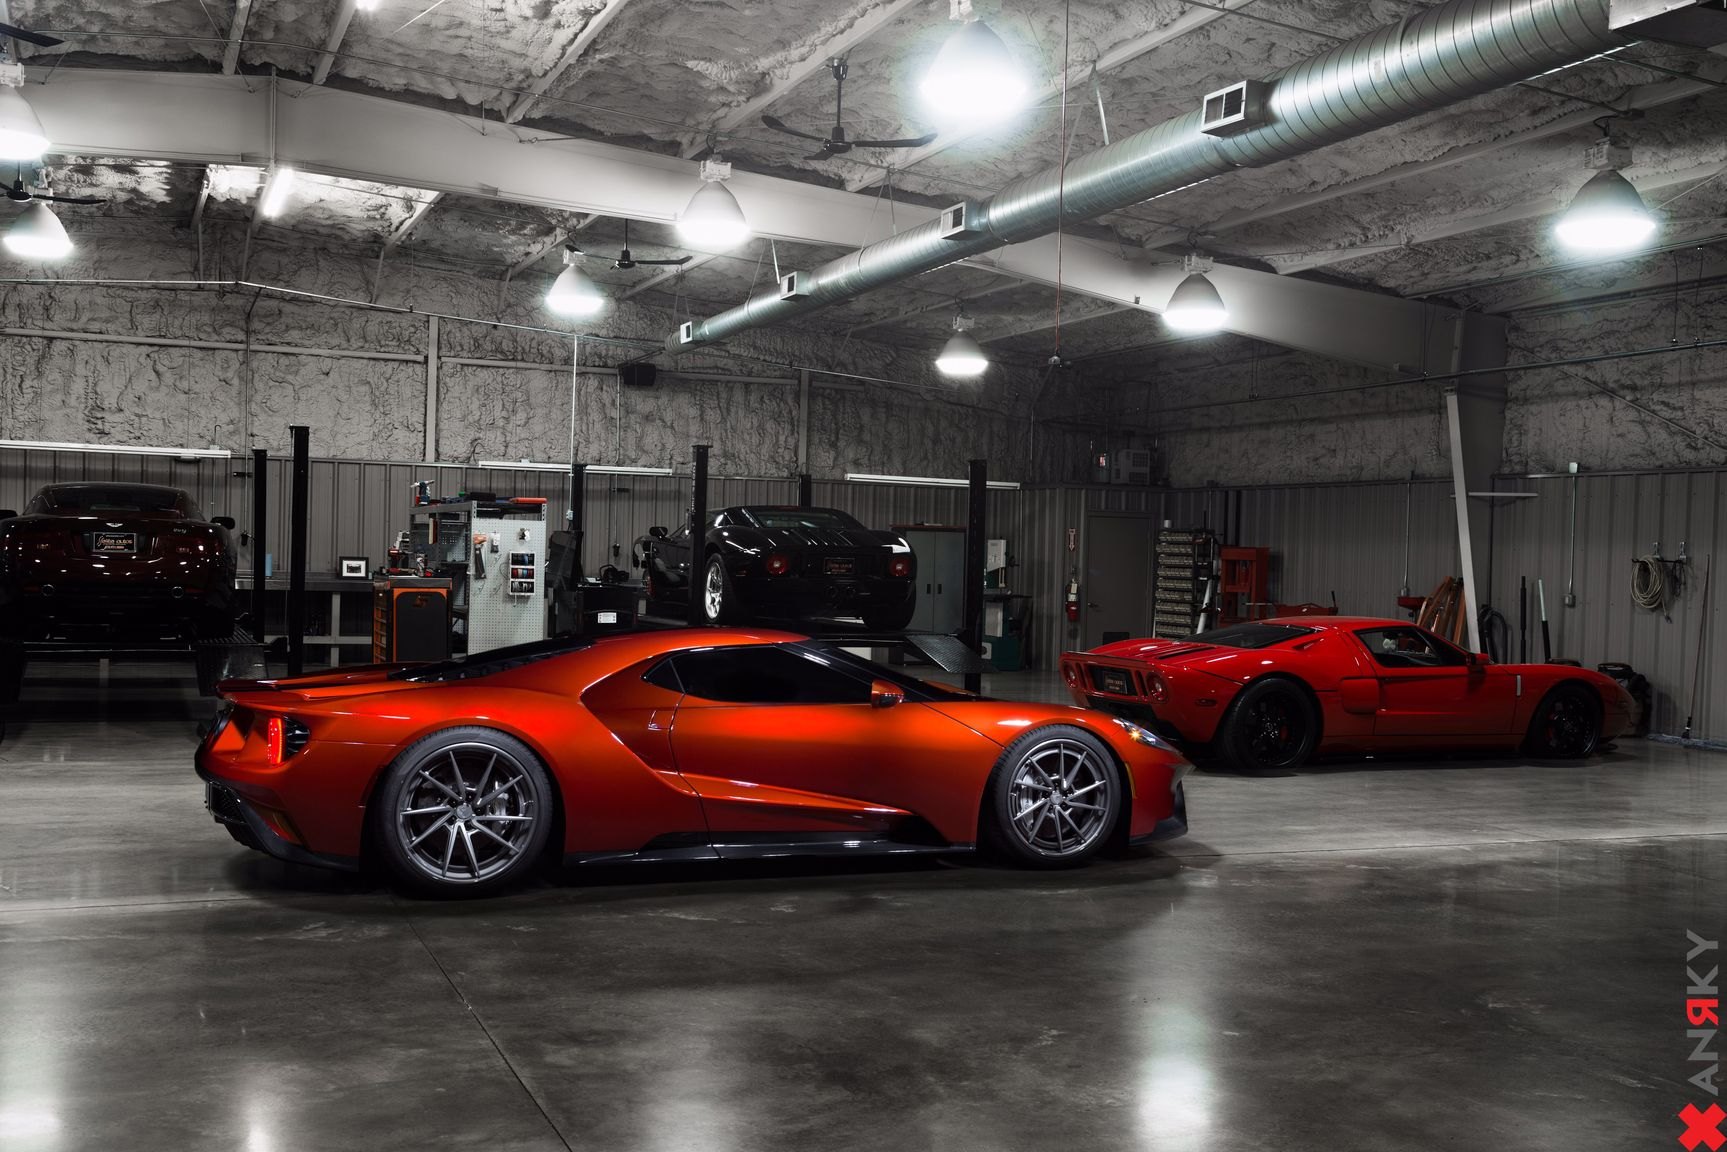 Aftermarket Side Scoops on Orange Ford GT - Photo by Anrky Wheels